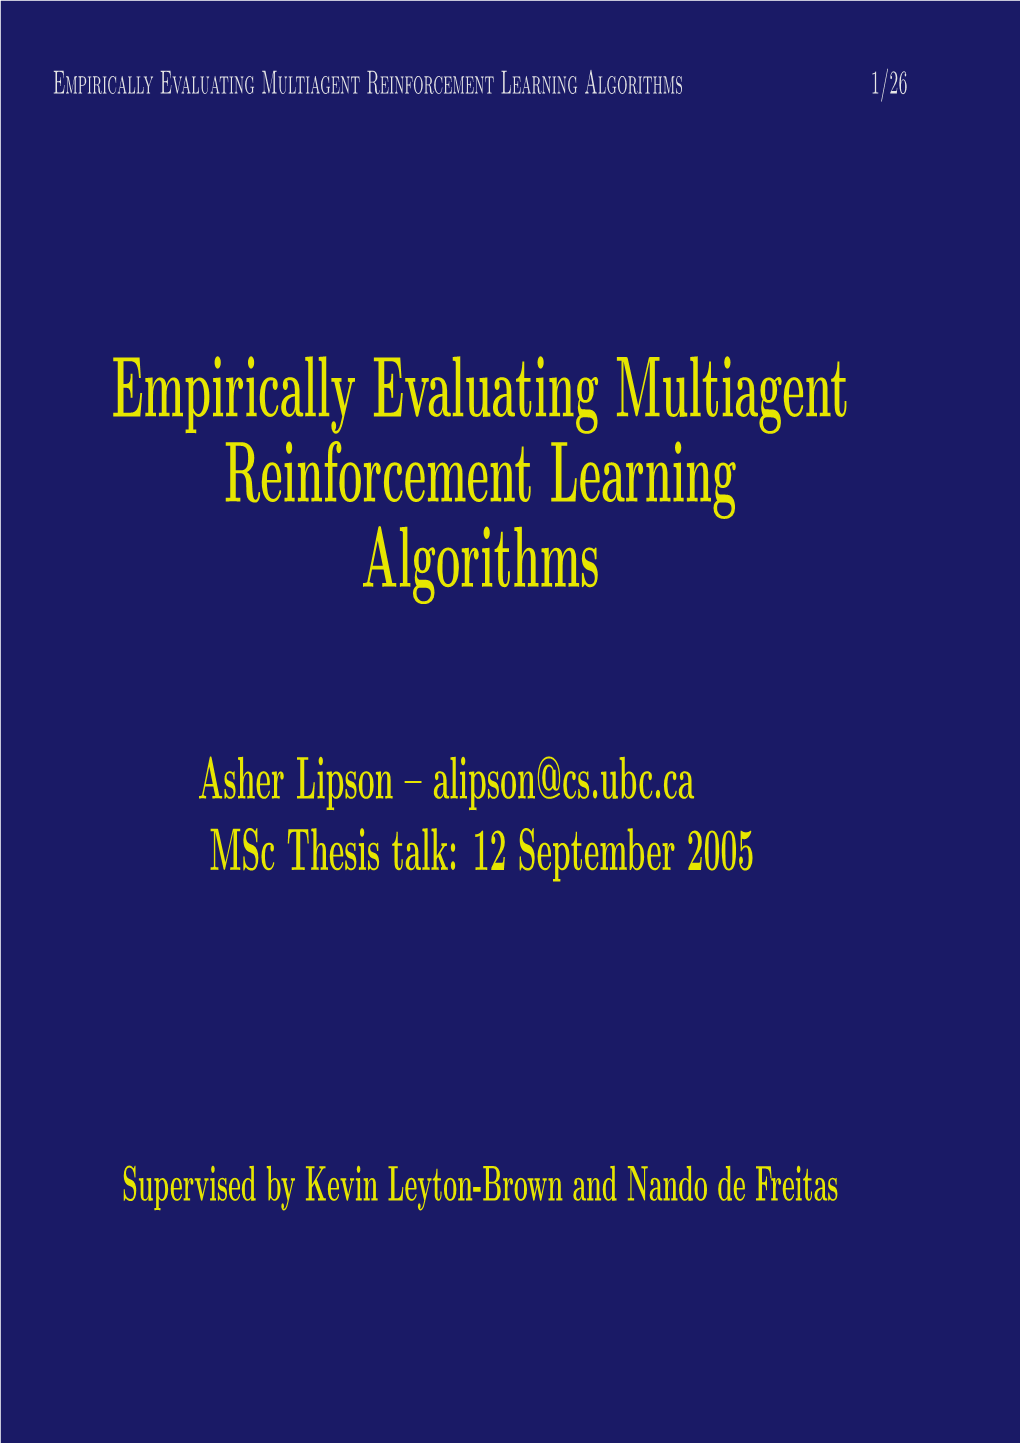 Empirically Evaluating Multiagent Reinforcement Learning Algorithms